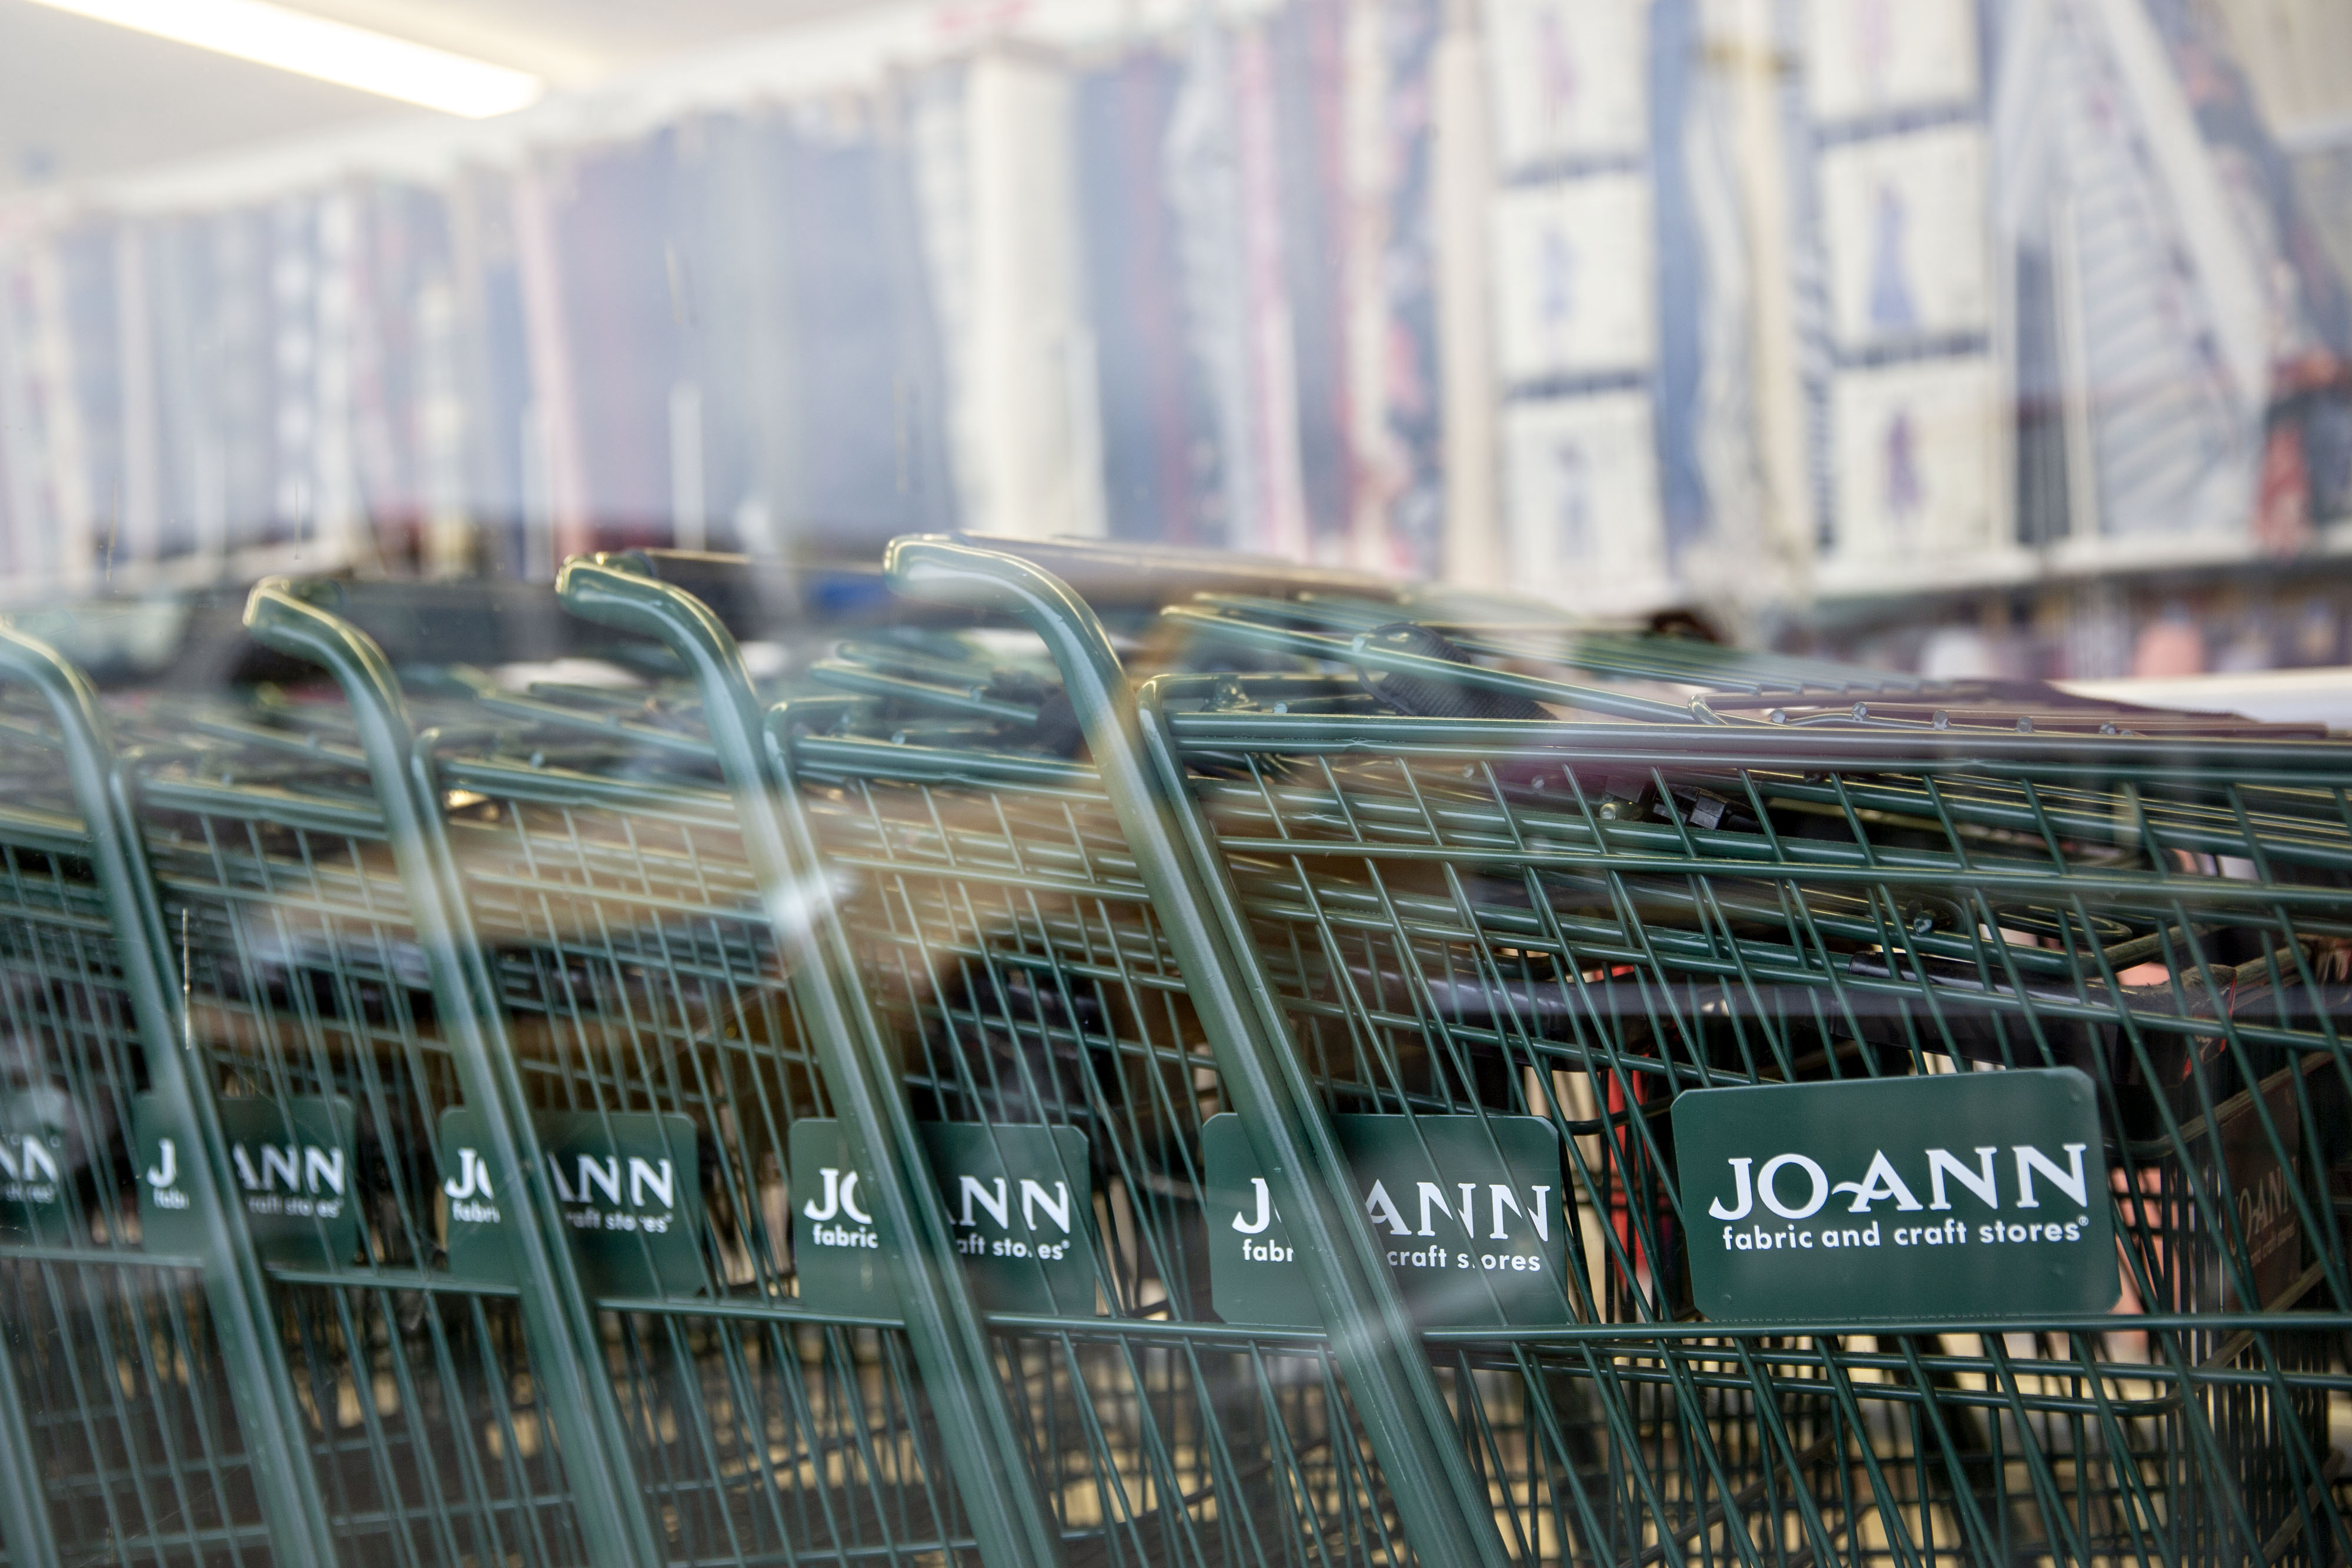 Fabric retailer Joann has a new store prototype. Here's how it looks